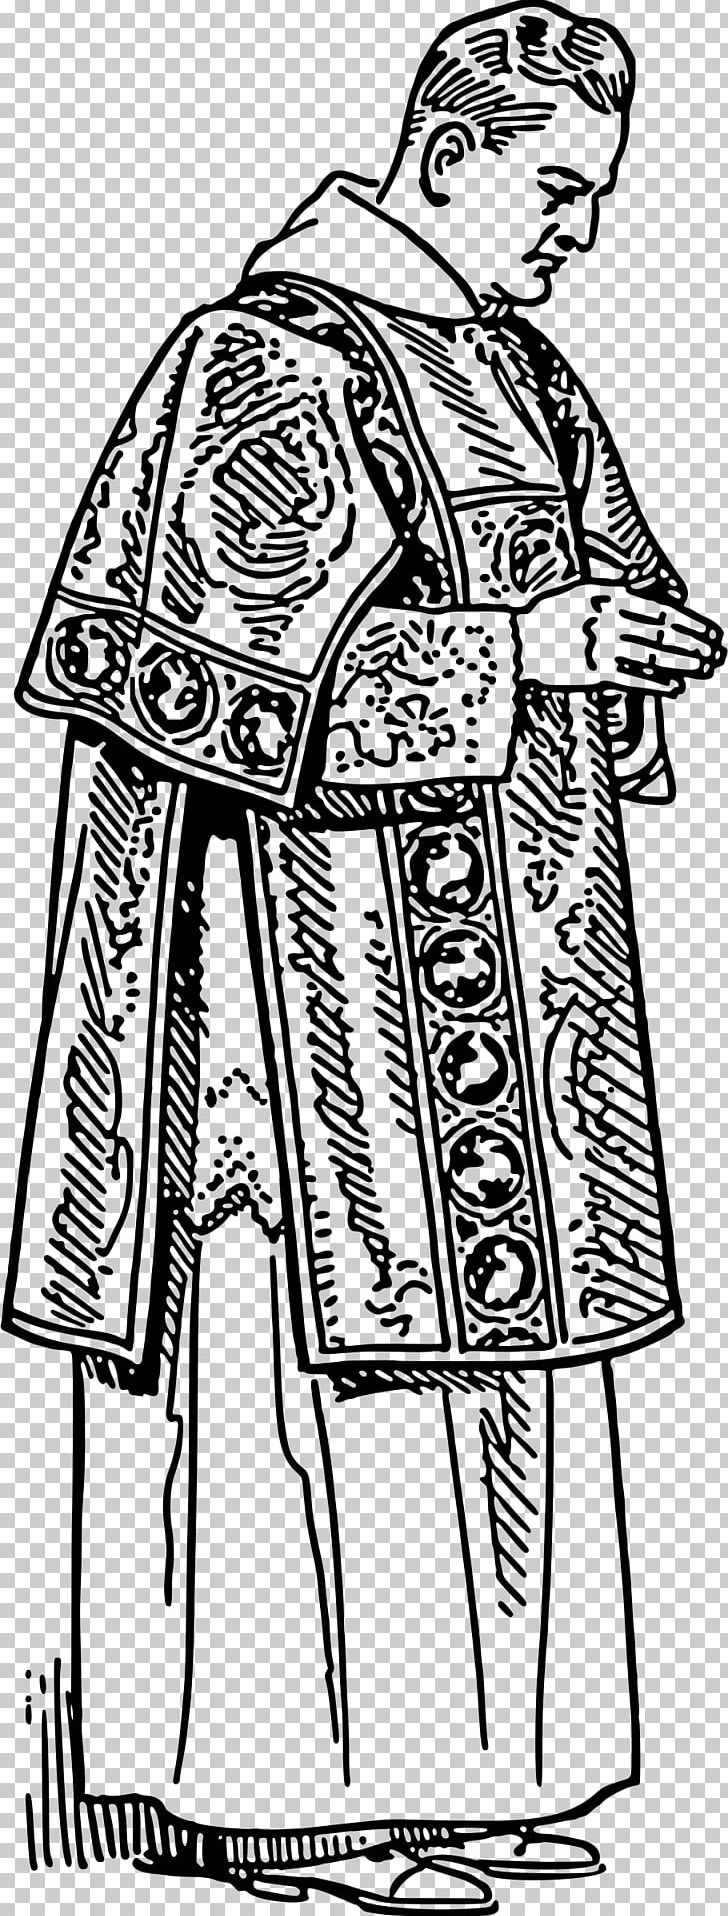 Dalmatic Deacon Vestment Stole Catholic Church PNG, Clipart, Art, Bishop, Black And White, Catholic, Chasuble Free PNG Download